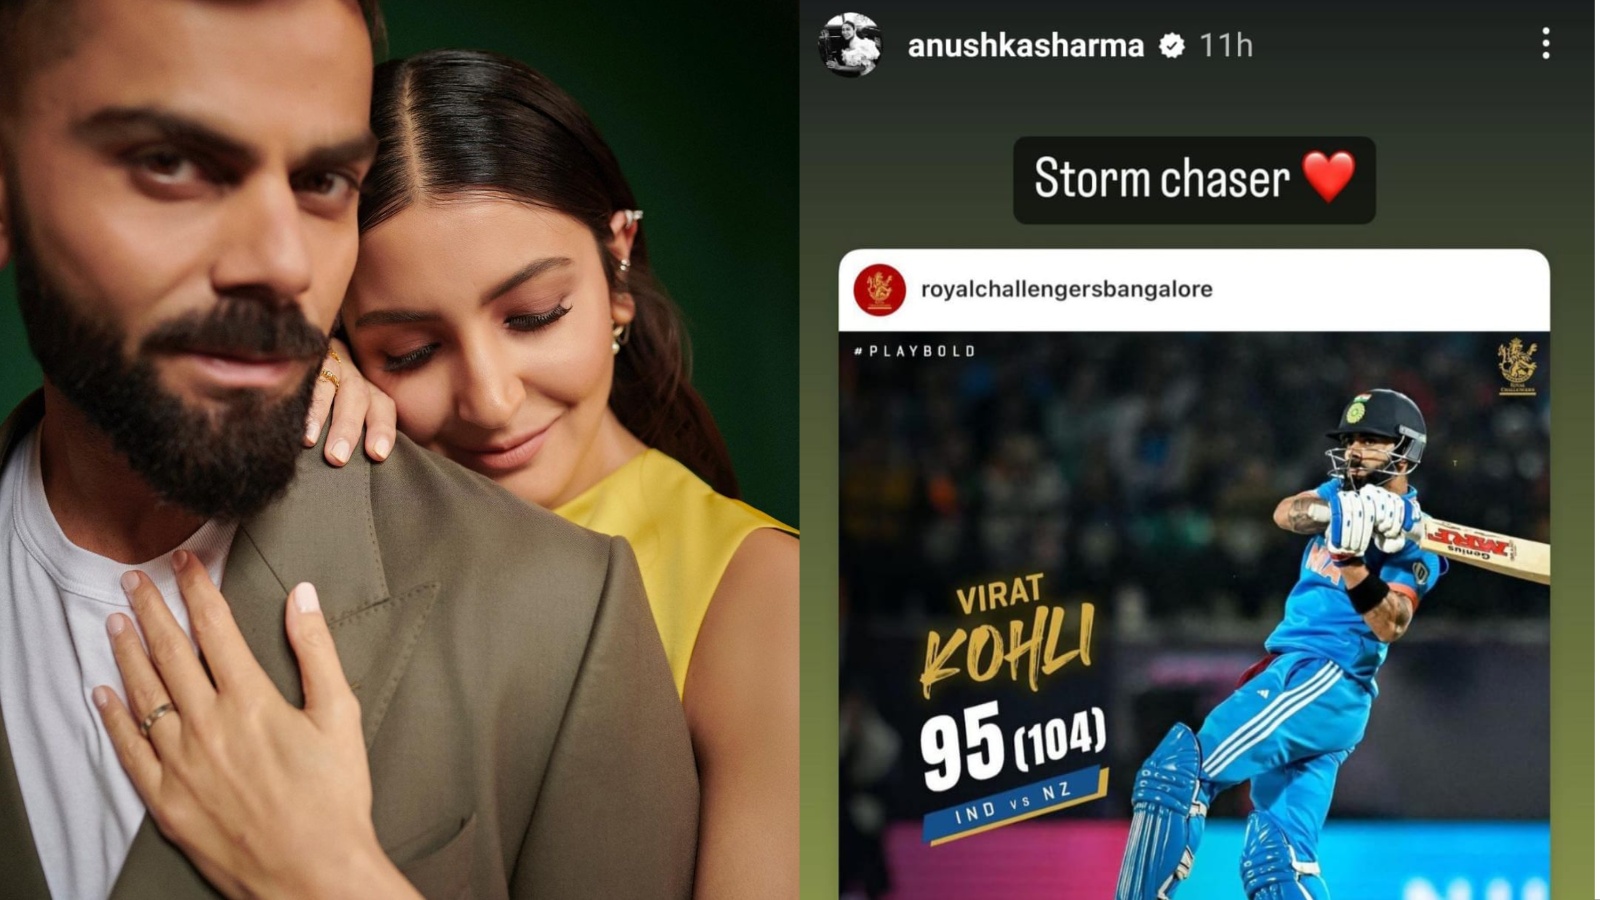 Anushka Sharma calls Virat Kohli 'storm chaser' after cricketer's knockout  performance in India vs NZ match: 'Always proud of you' | Bollywood News -  The Indian Express